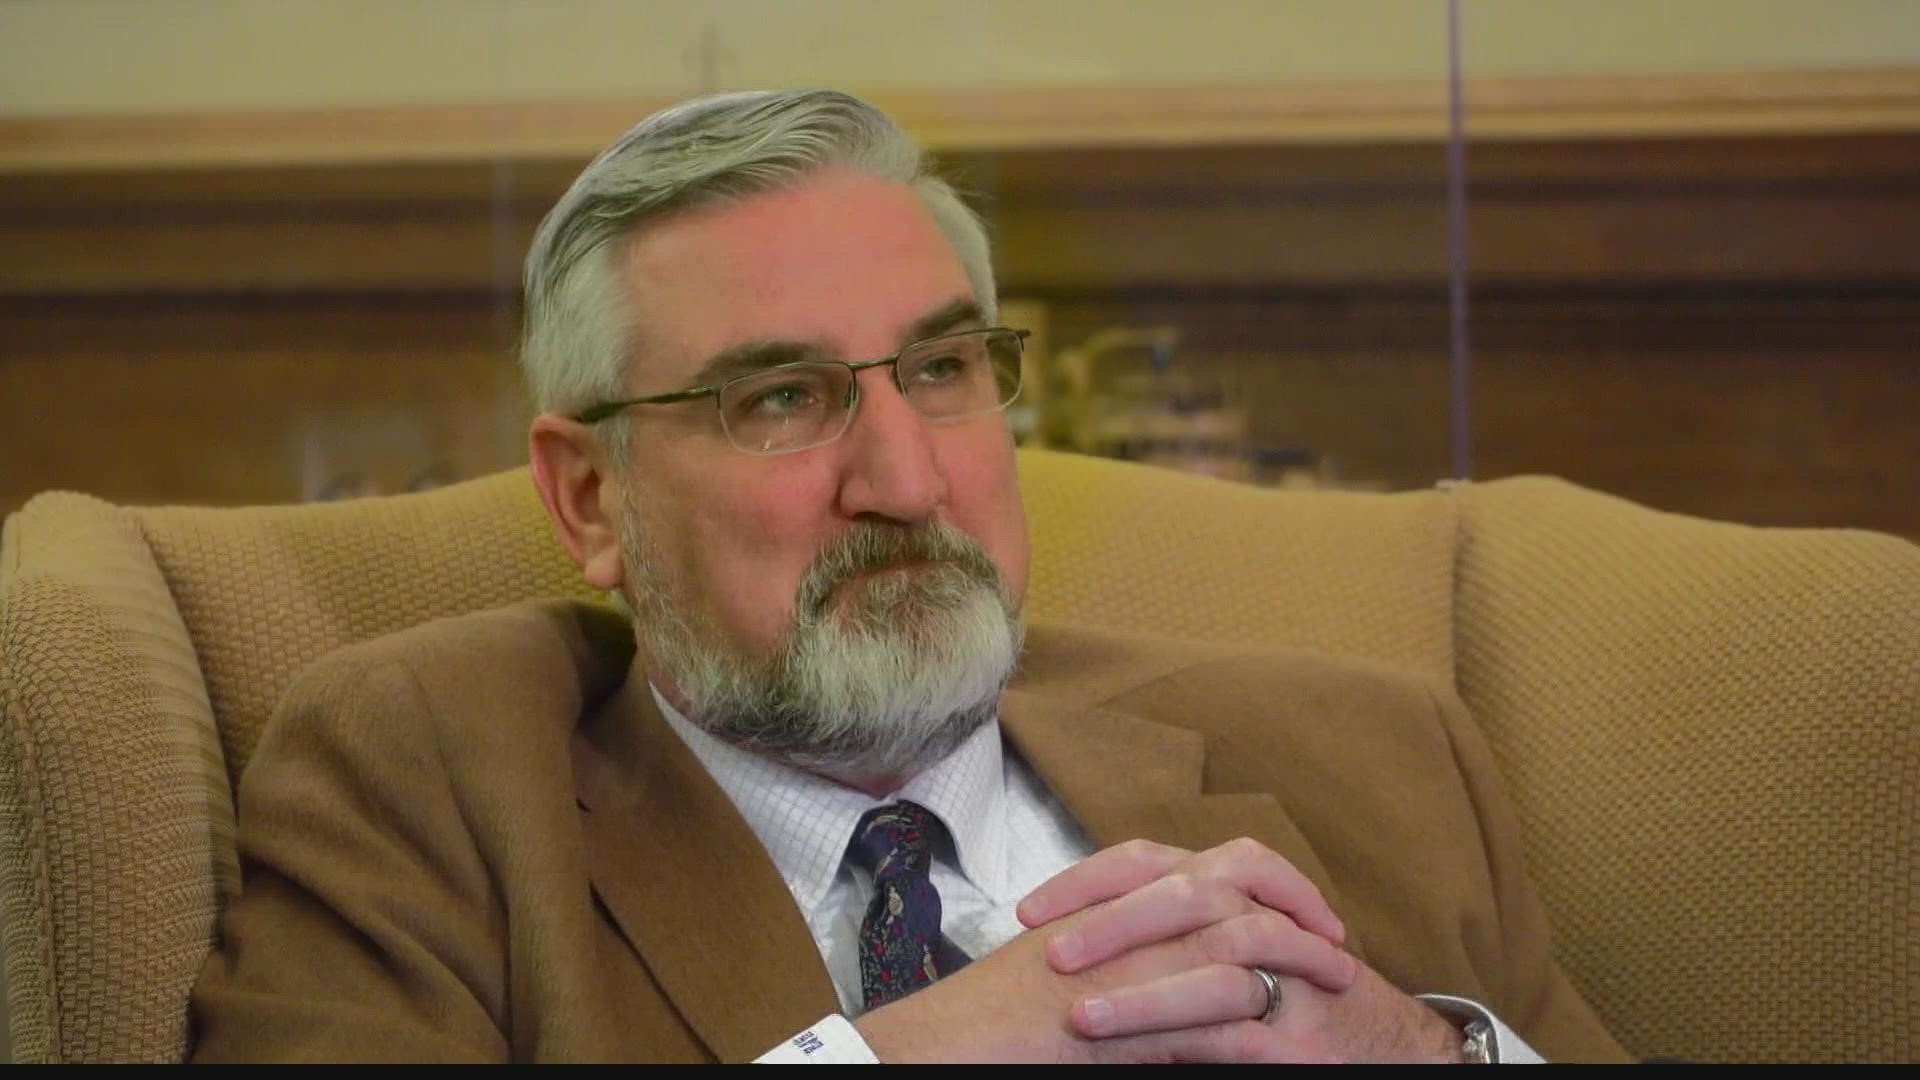 In the past, Holcomb said if marijuana was not legal at the federal level he did not support it being legalized in Indiana.